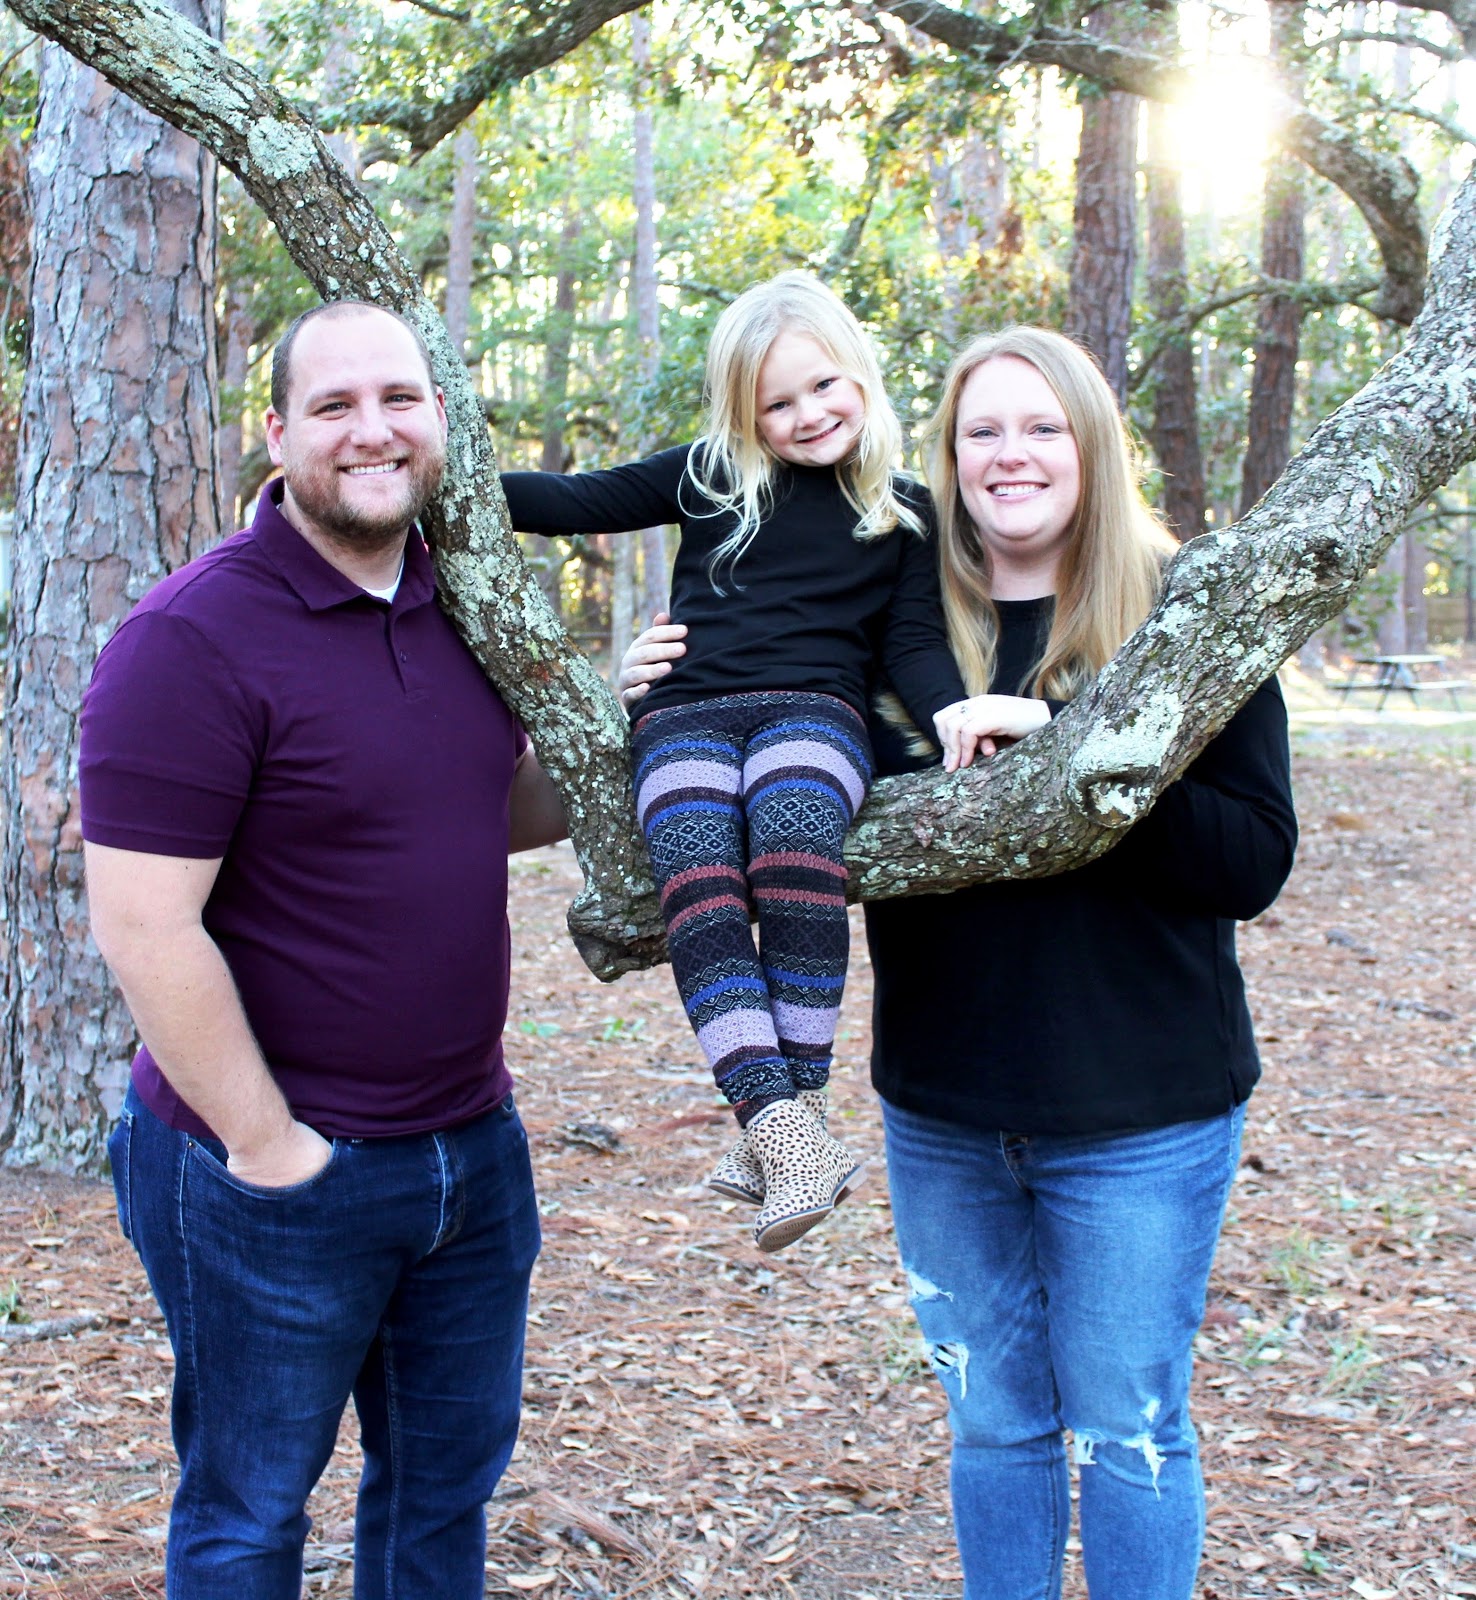 Read five stories of couples and families looking to adopt. Read about what brought them to look into and why they chose to pursue adoption.